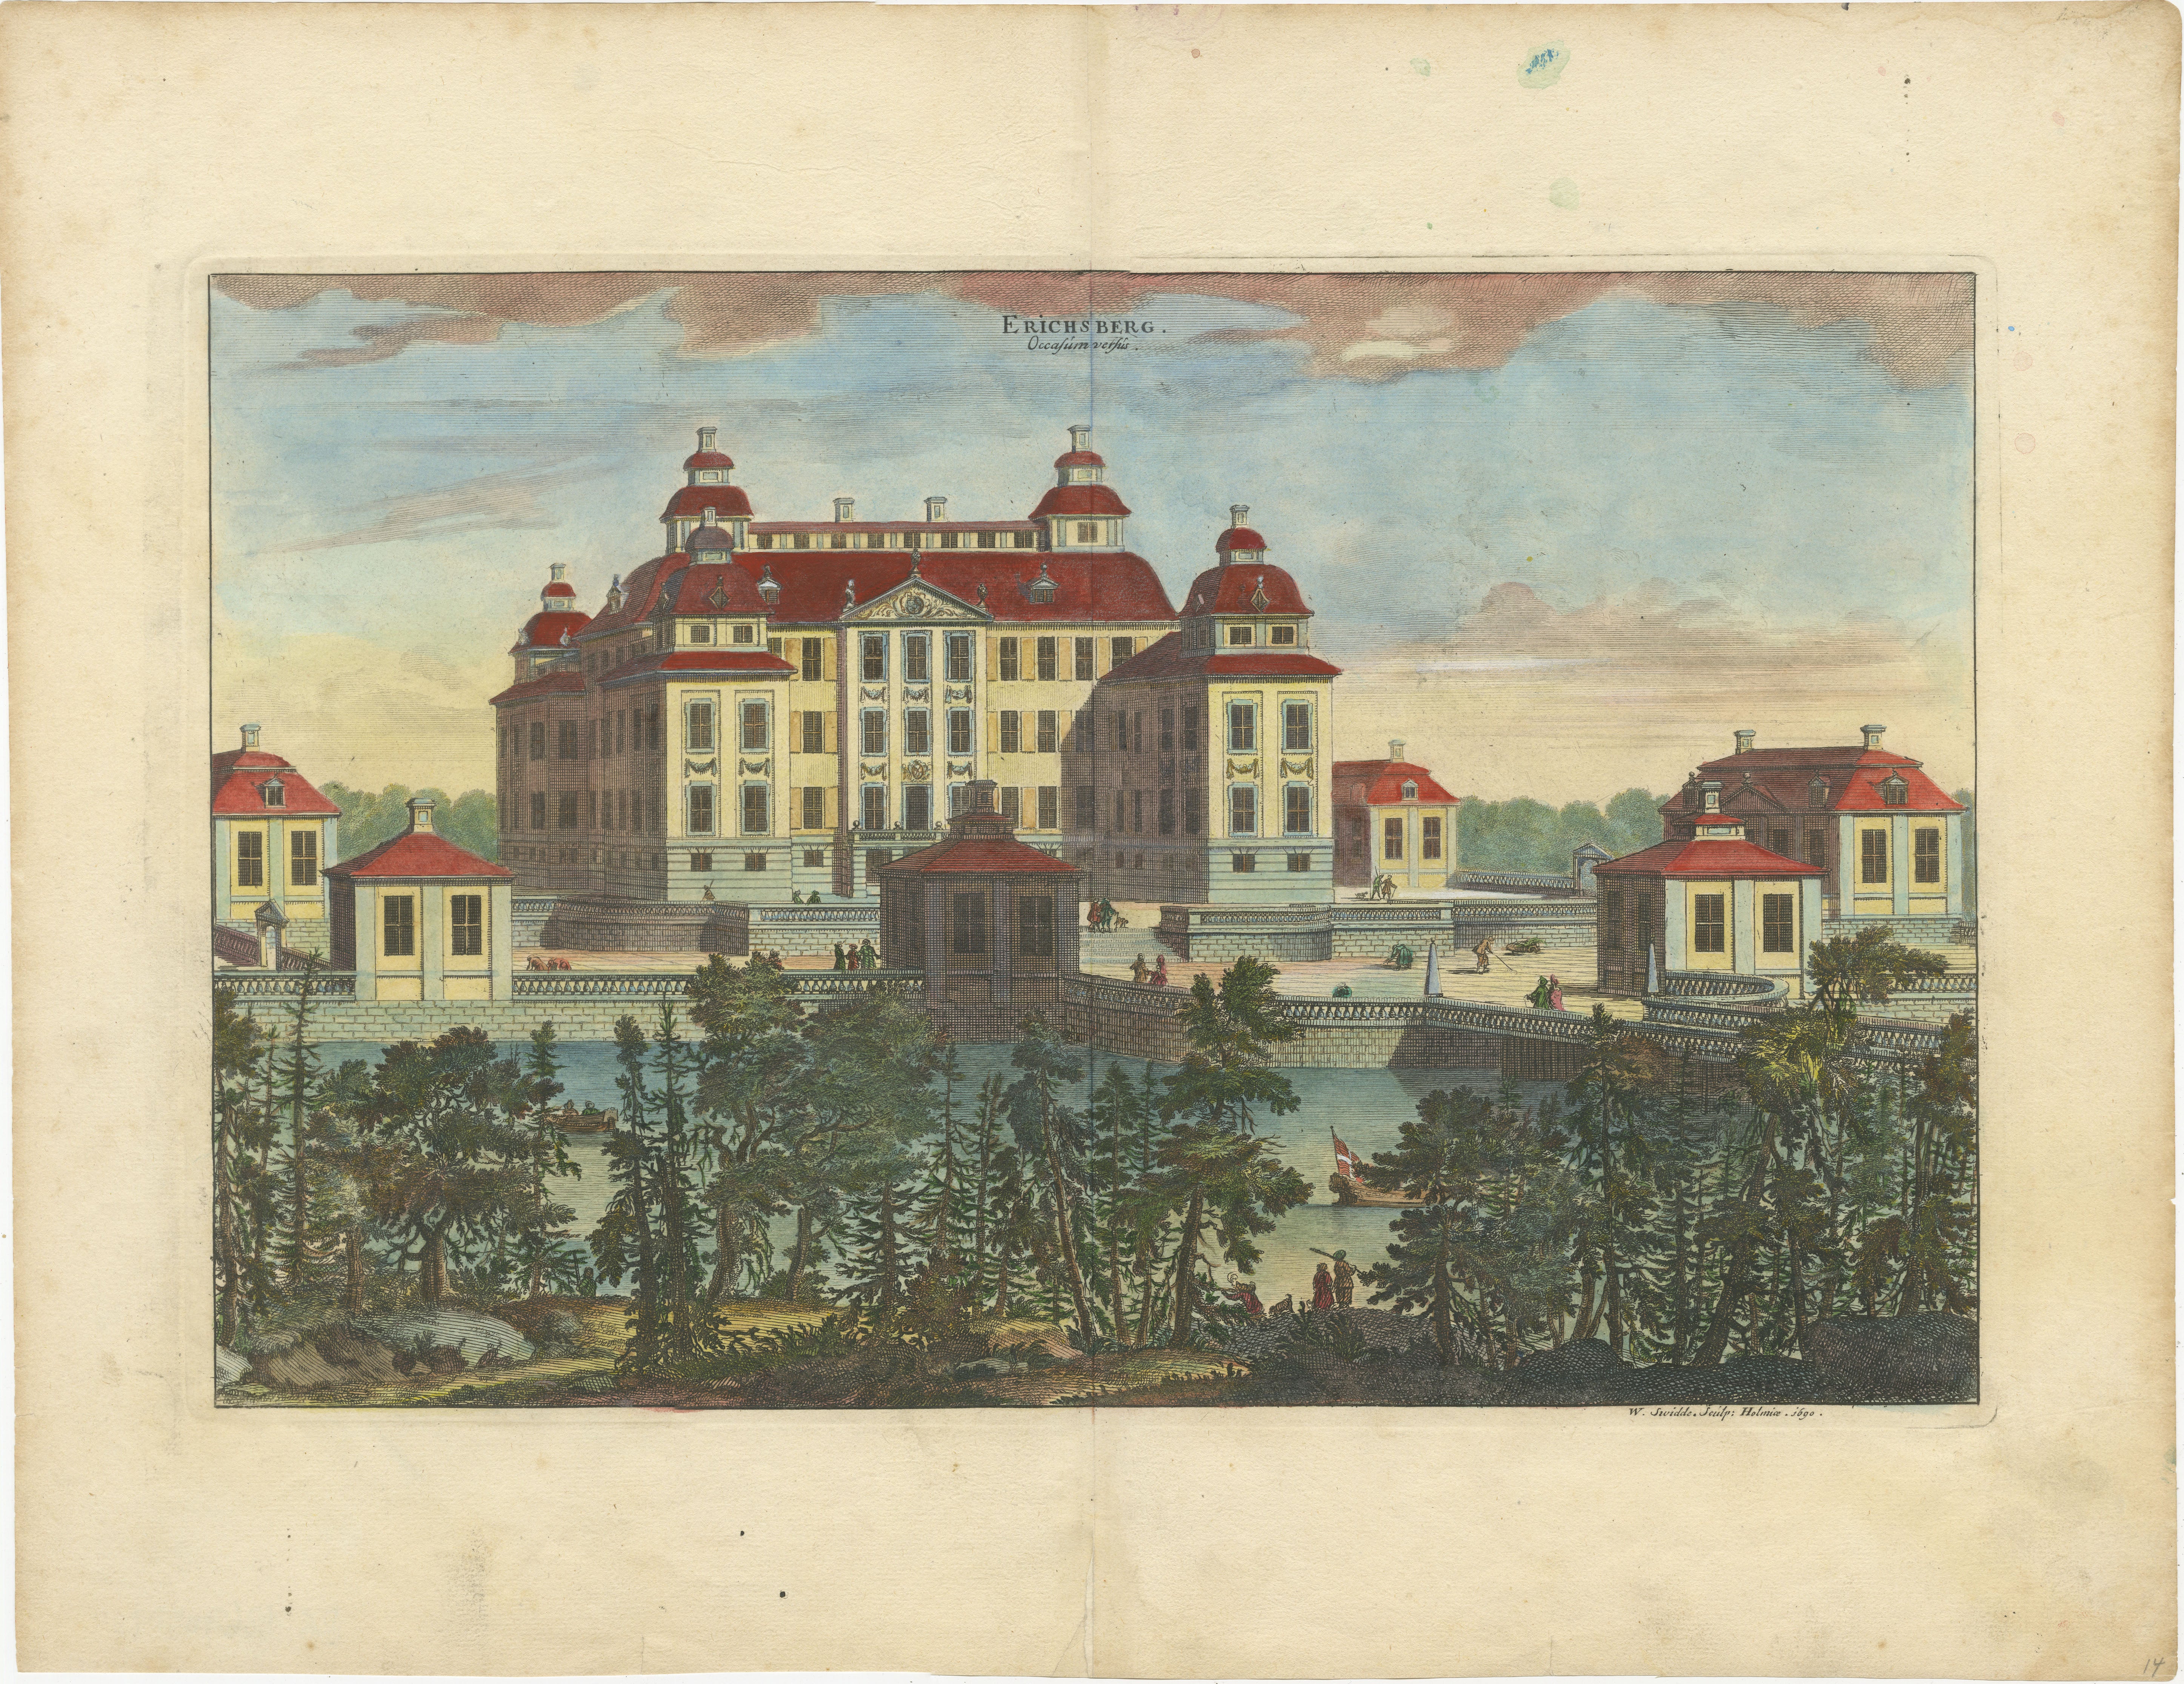 The engraving depicts Ericsberg Castle (Erichsberg), a baroque castle located in Södermanland, Sweden. This hand-colored print is from 